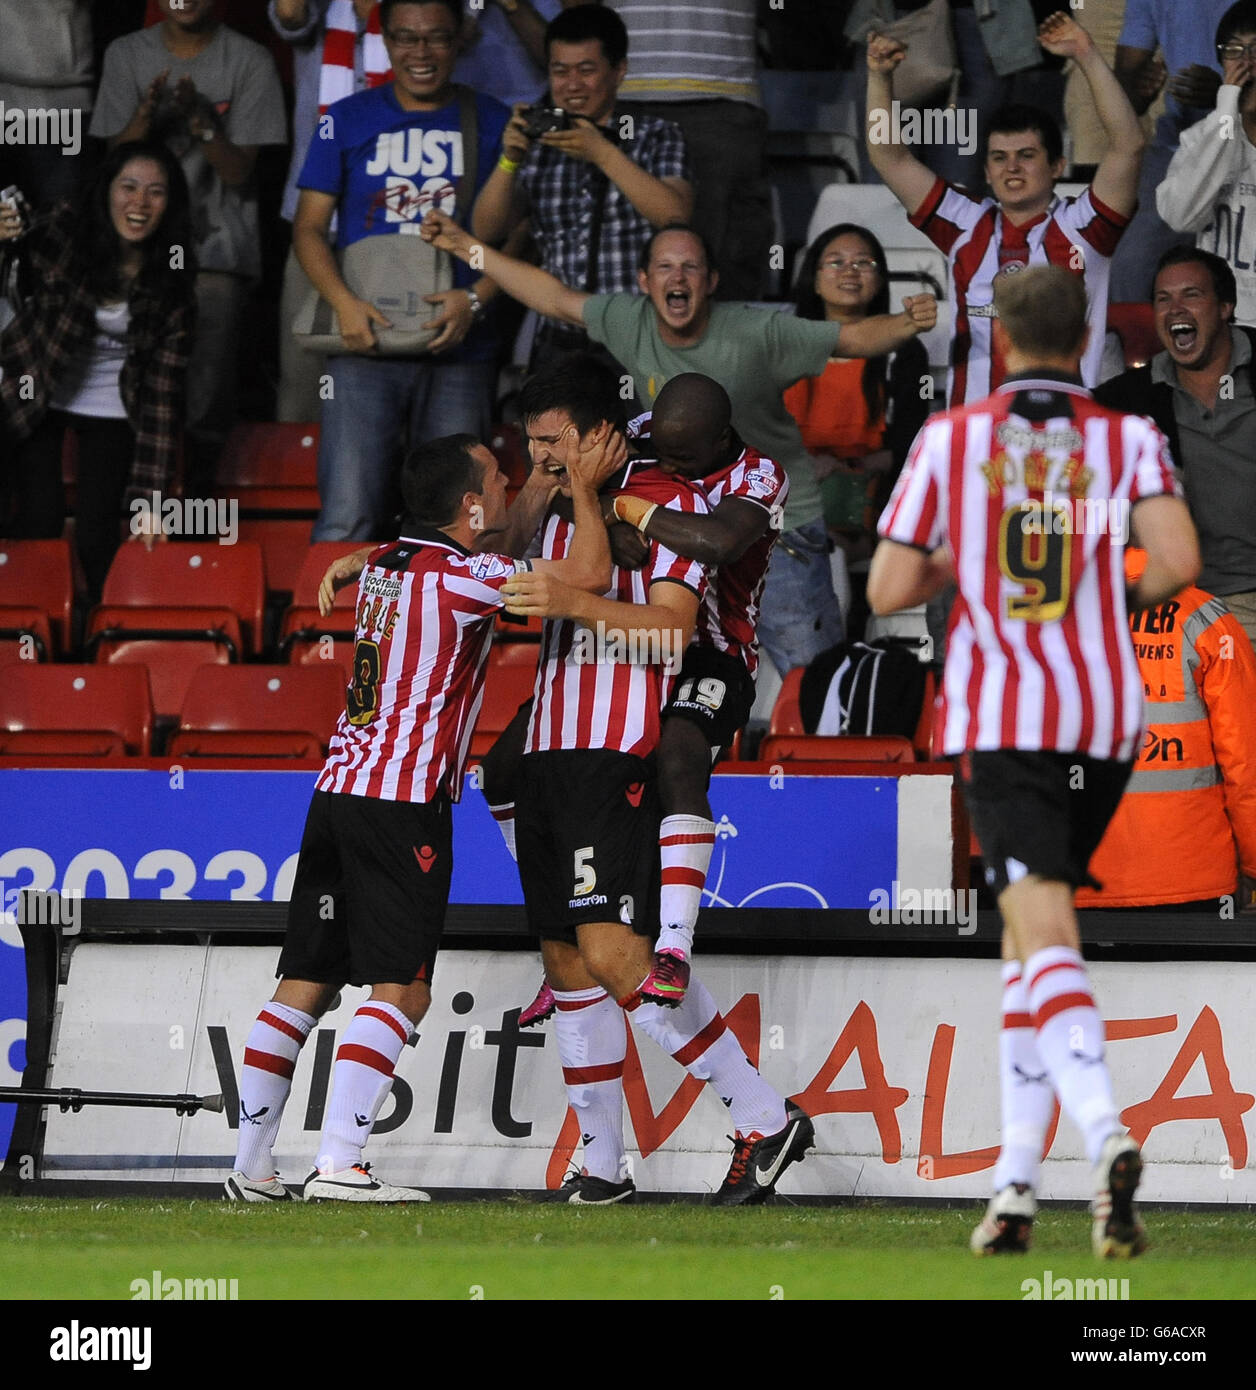 Sheffield United's Harry Maguire (2nd left) celebrates with Michael Doyle (left) and Fabian Brandy (2nd right) after scoring his sides second goal during the Sky Bet League One match at Bramall Lane, Sheffield. Stock Photo